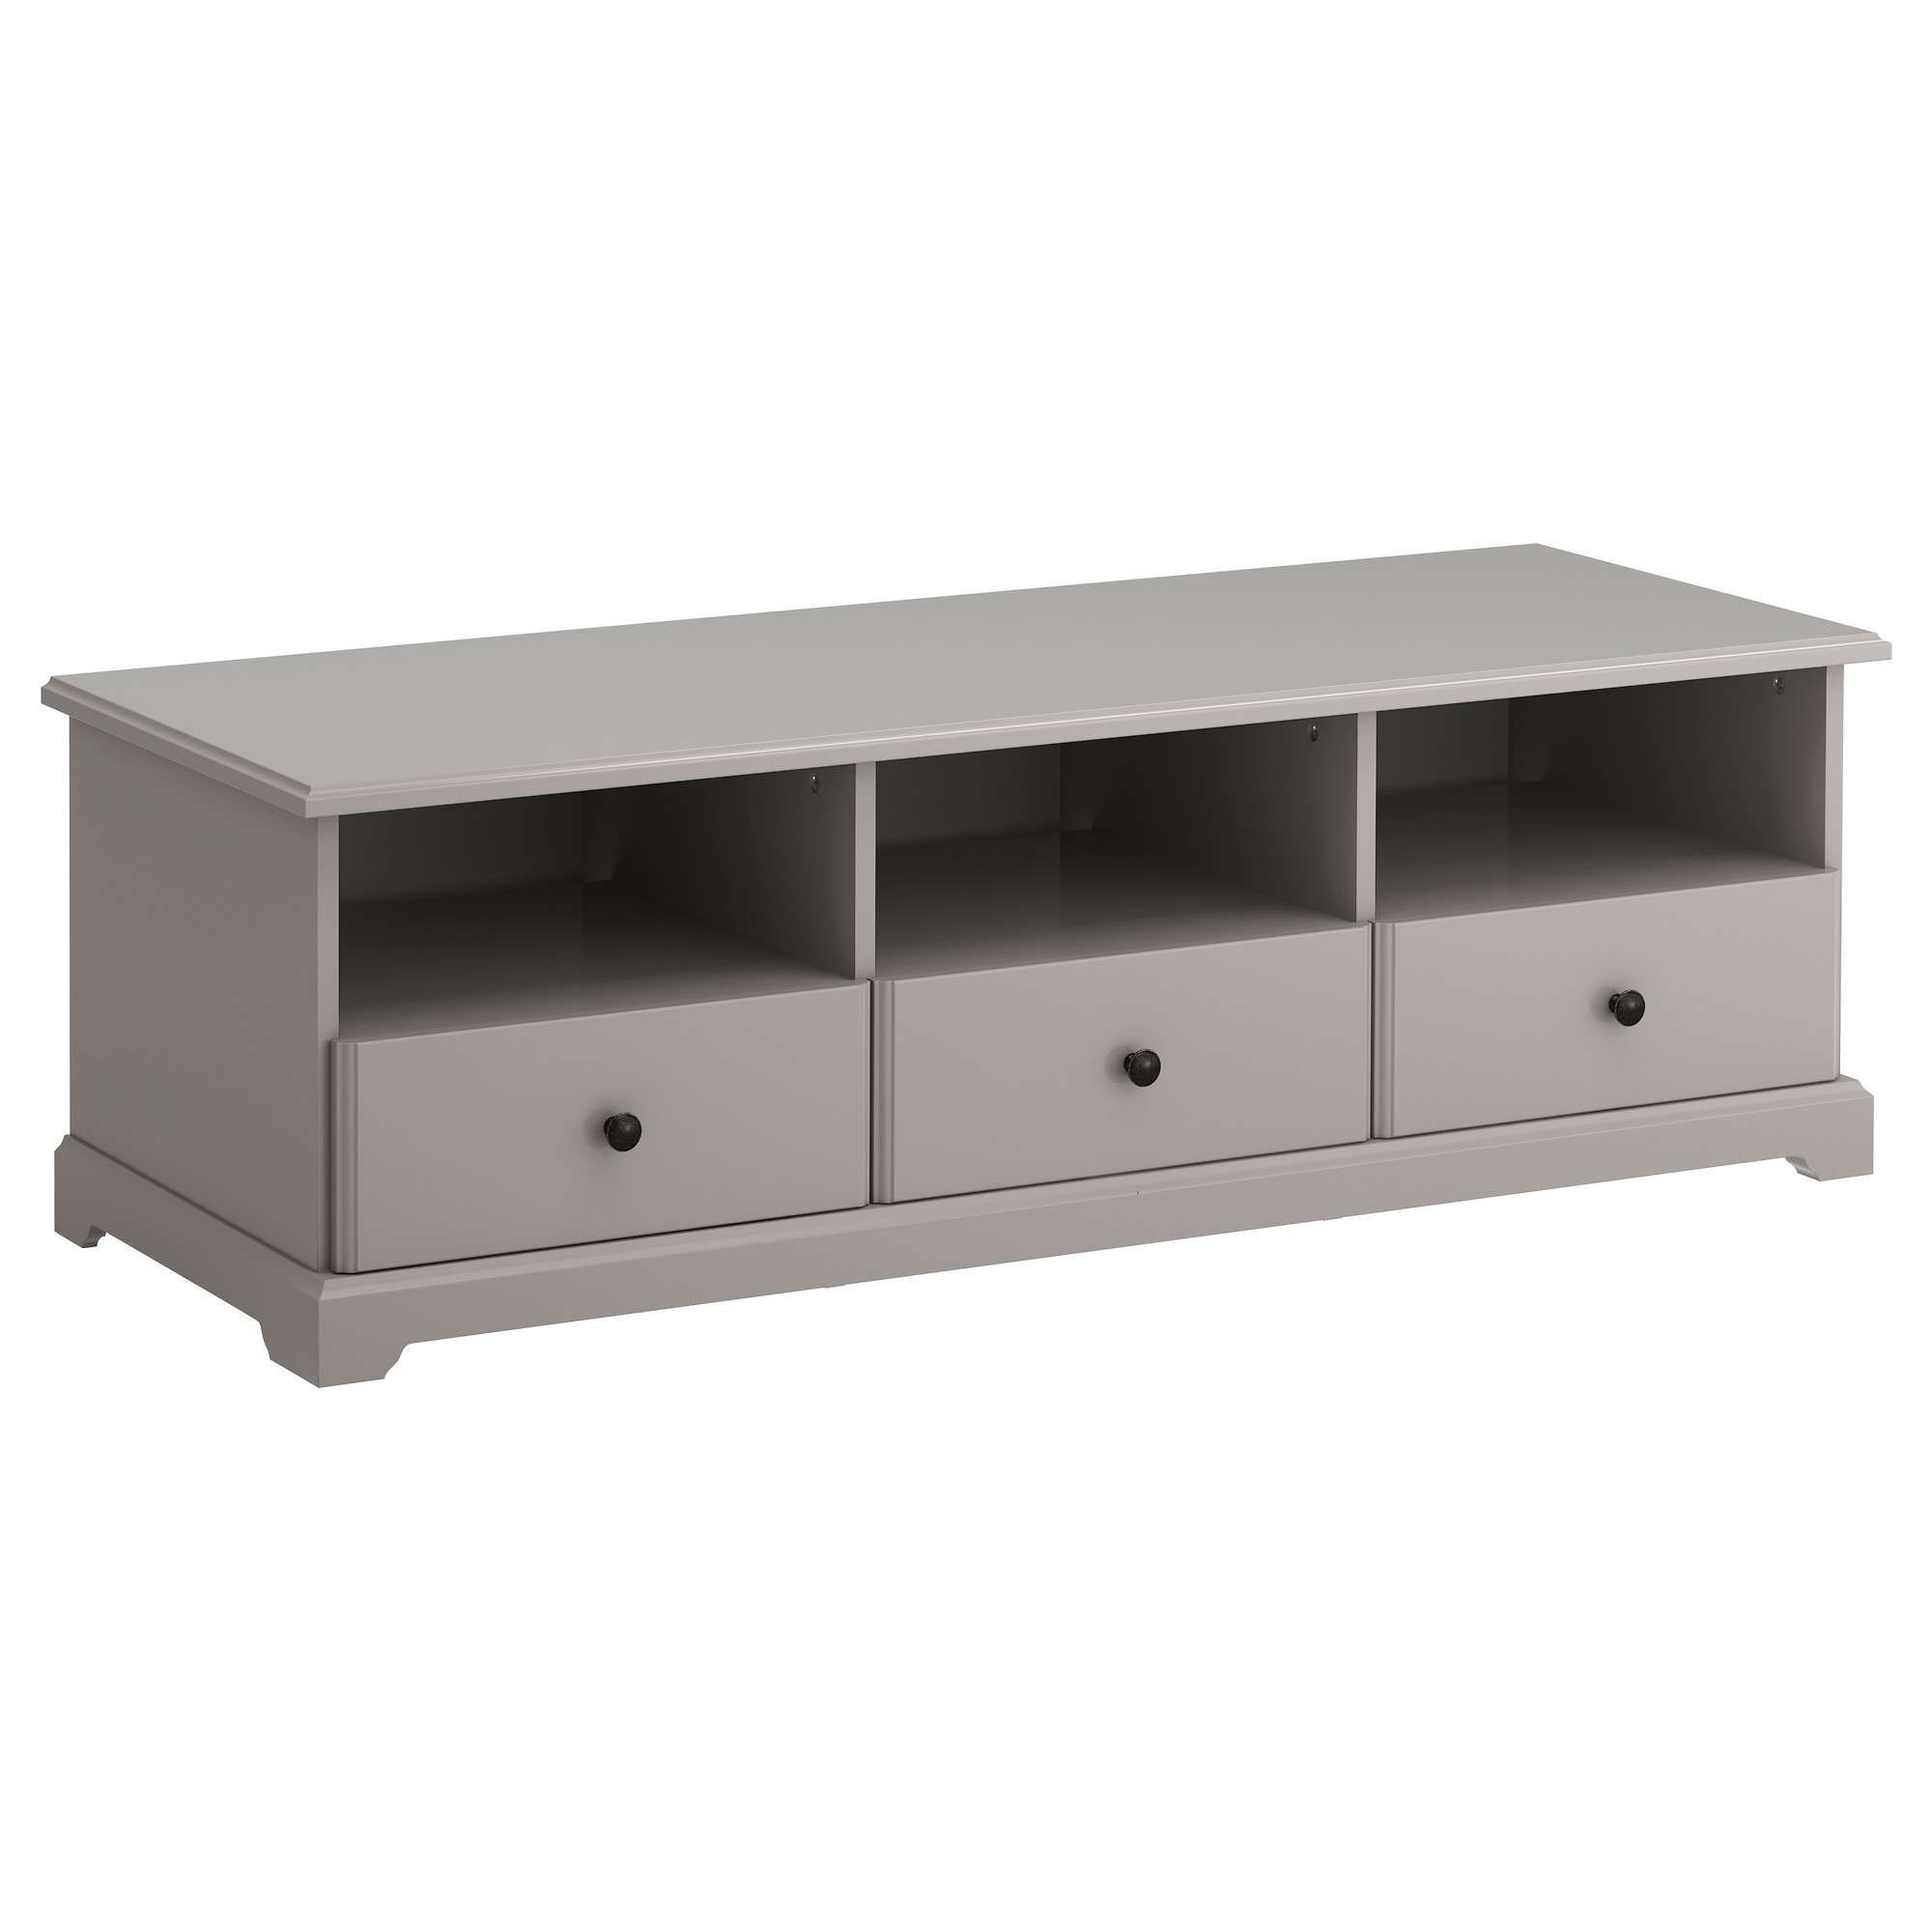 Liatorp Tv Bench Grey 145x49x45 Cm – Ikea Inside Grey Tv Stands (View 2 of 15)